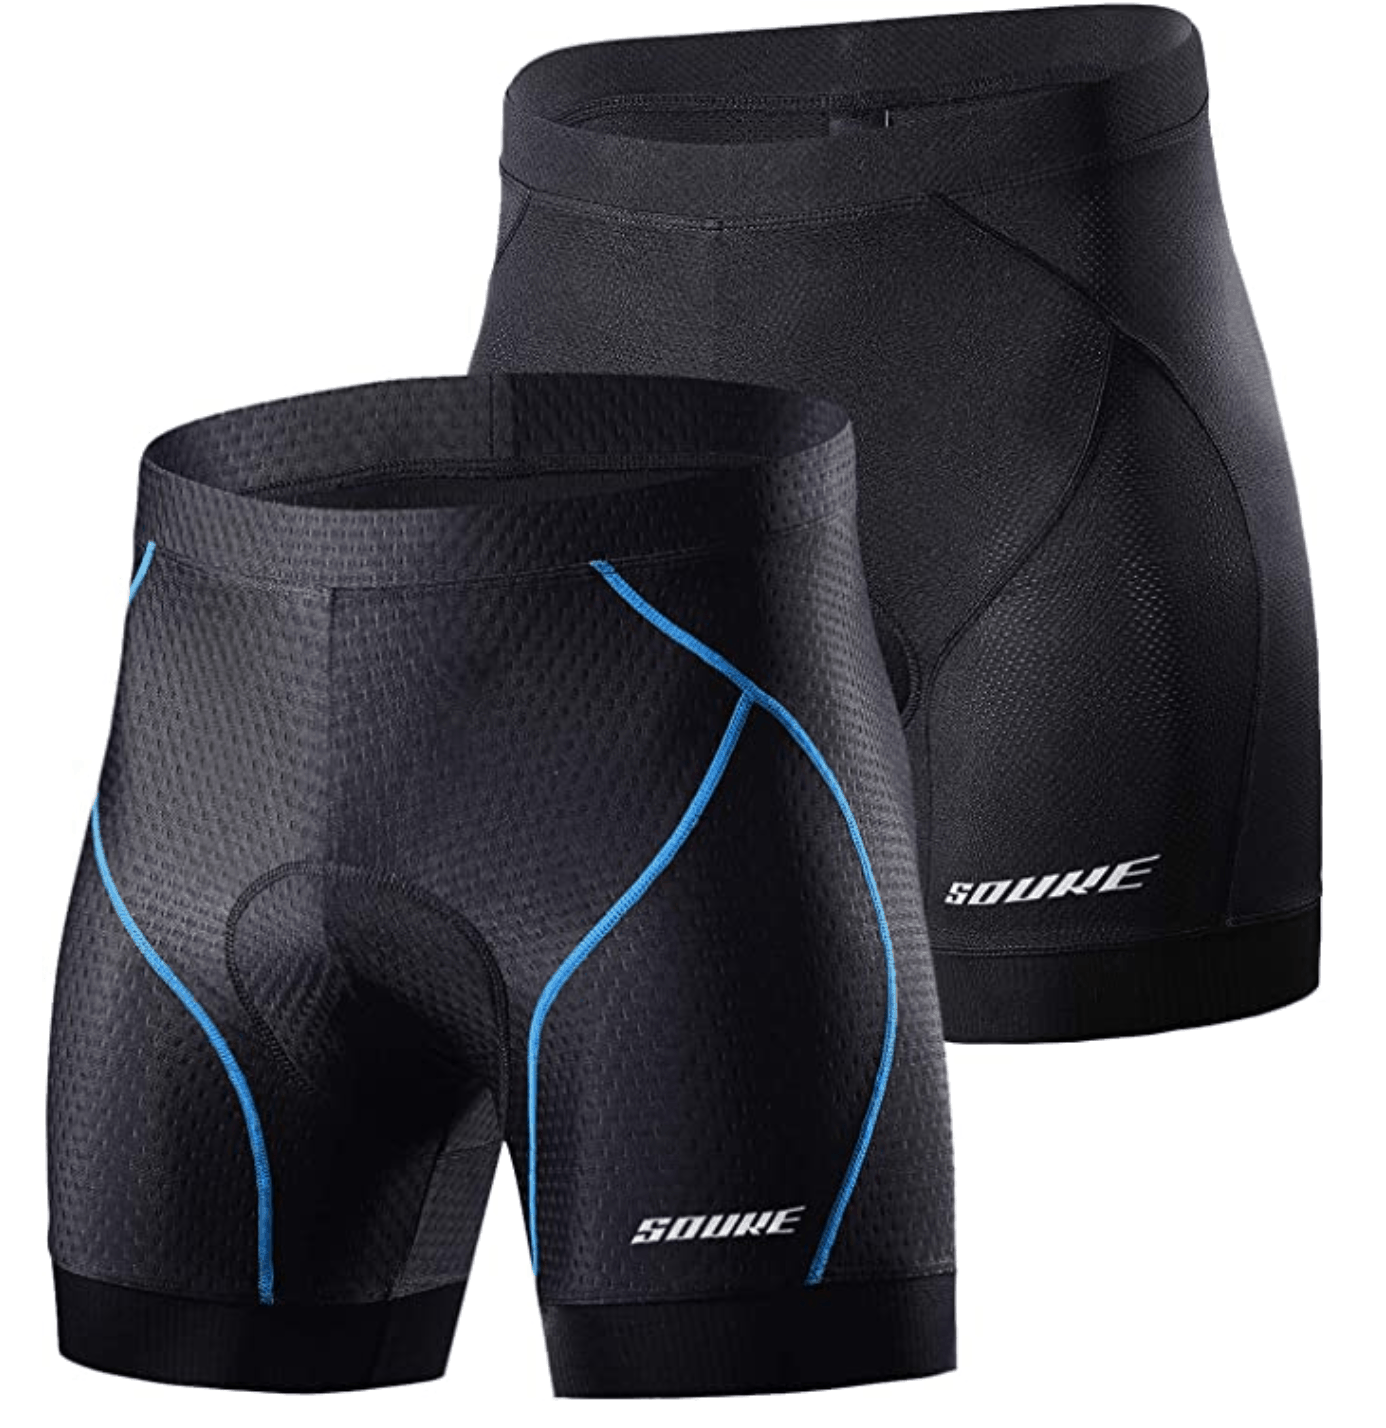 Souke Sports Men's Cycling Underwear Shorts 4D Padded Bike Bicycle MTB Liner Shorts with Anti-Slip Leg Grips